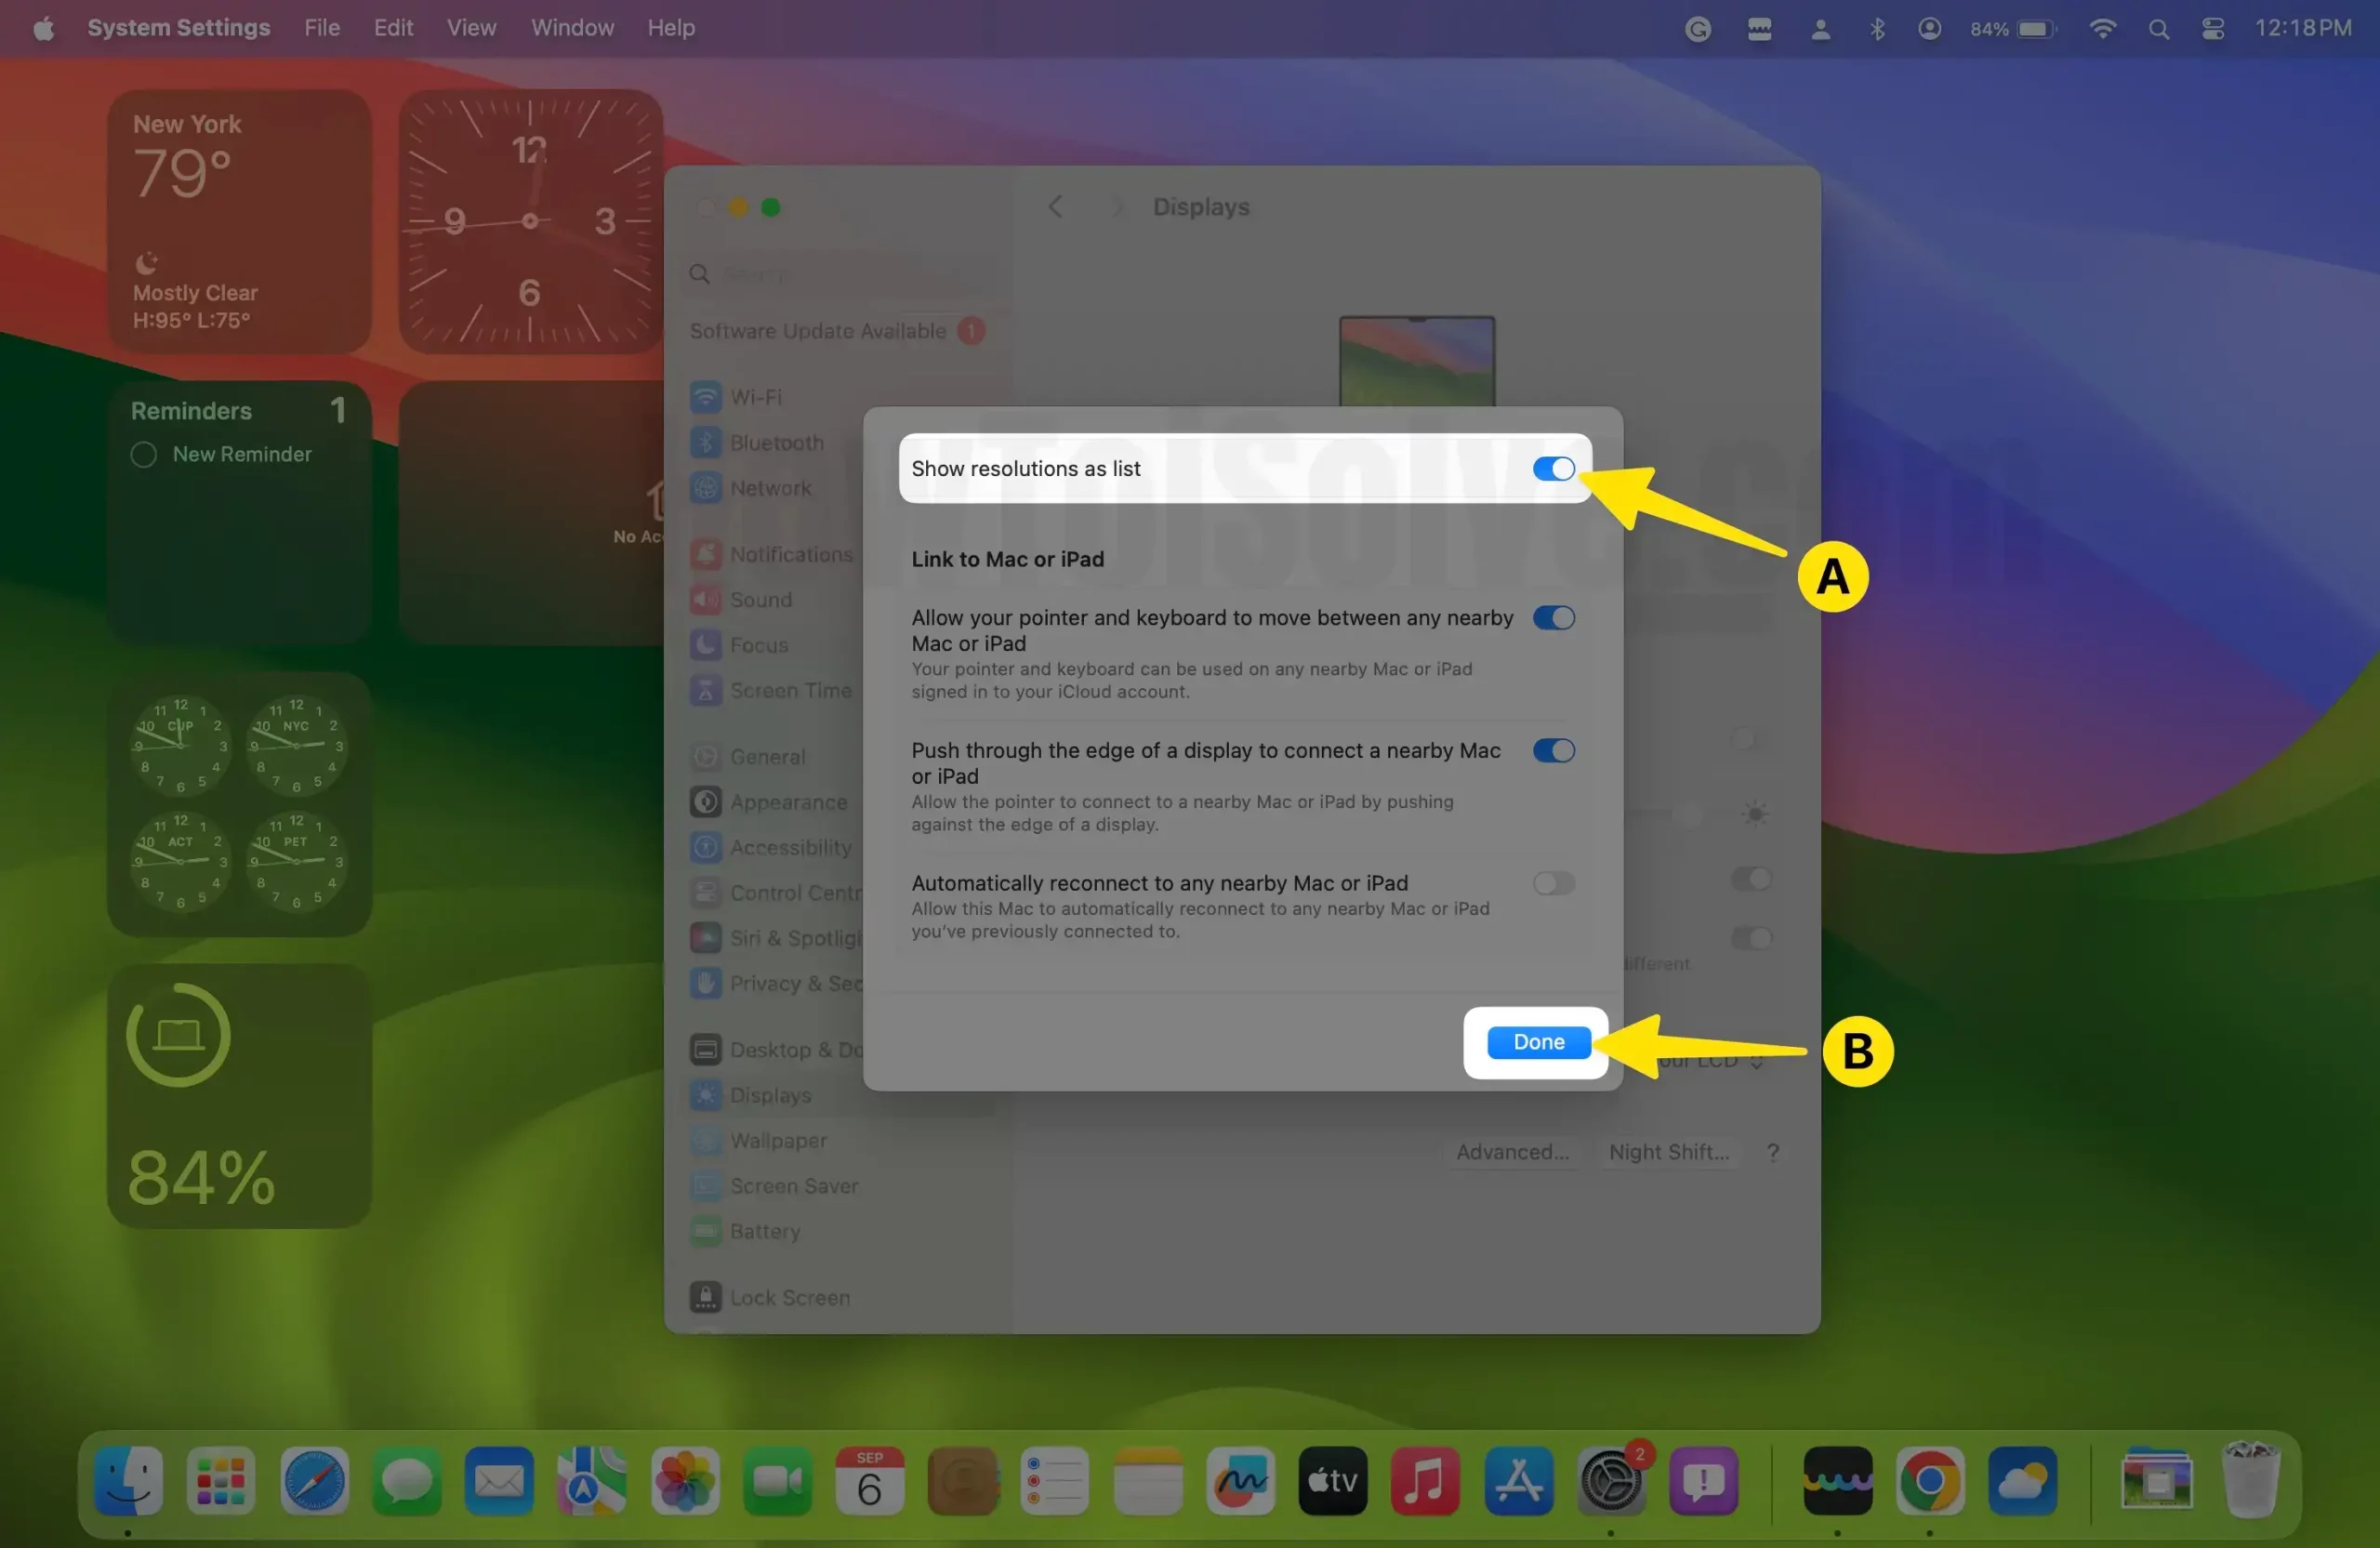 Hide and Show resolutions as list on Mac